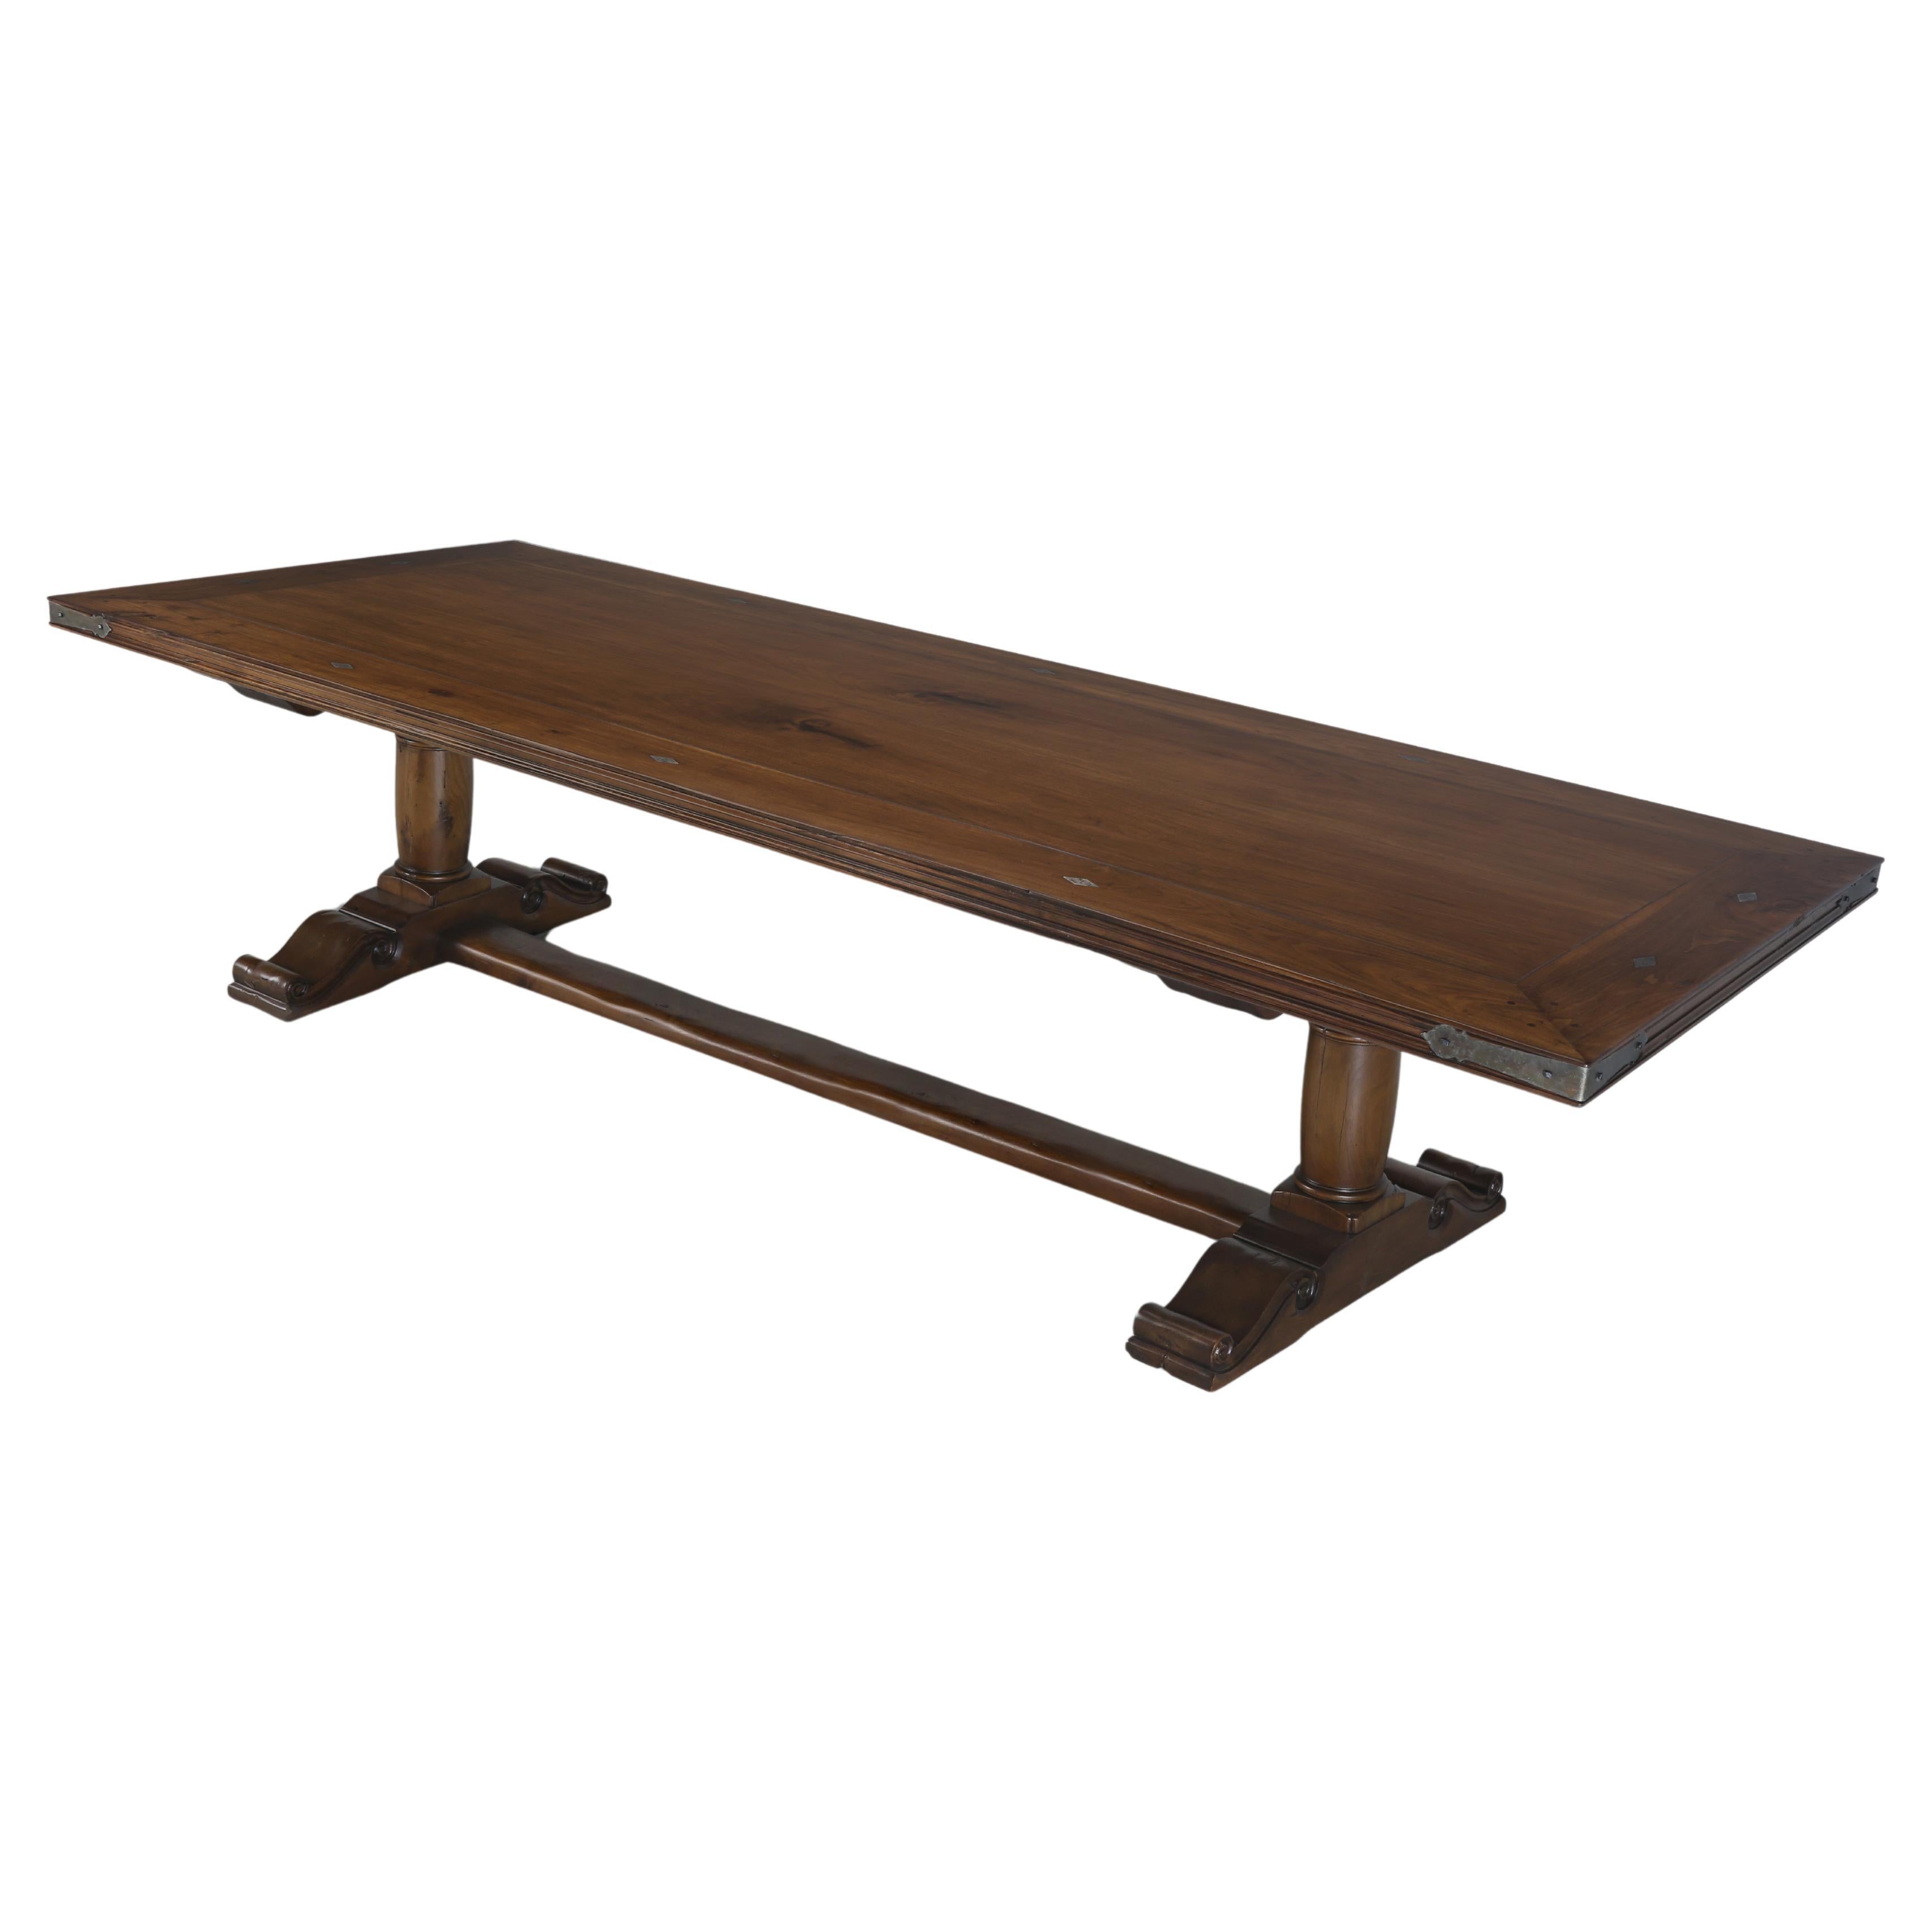 Country French Inspired Walnut Dining Table by Old Plank Hand-Made to Order For Sale